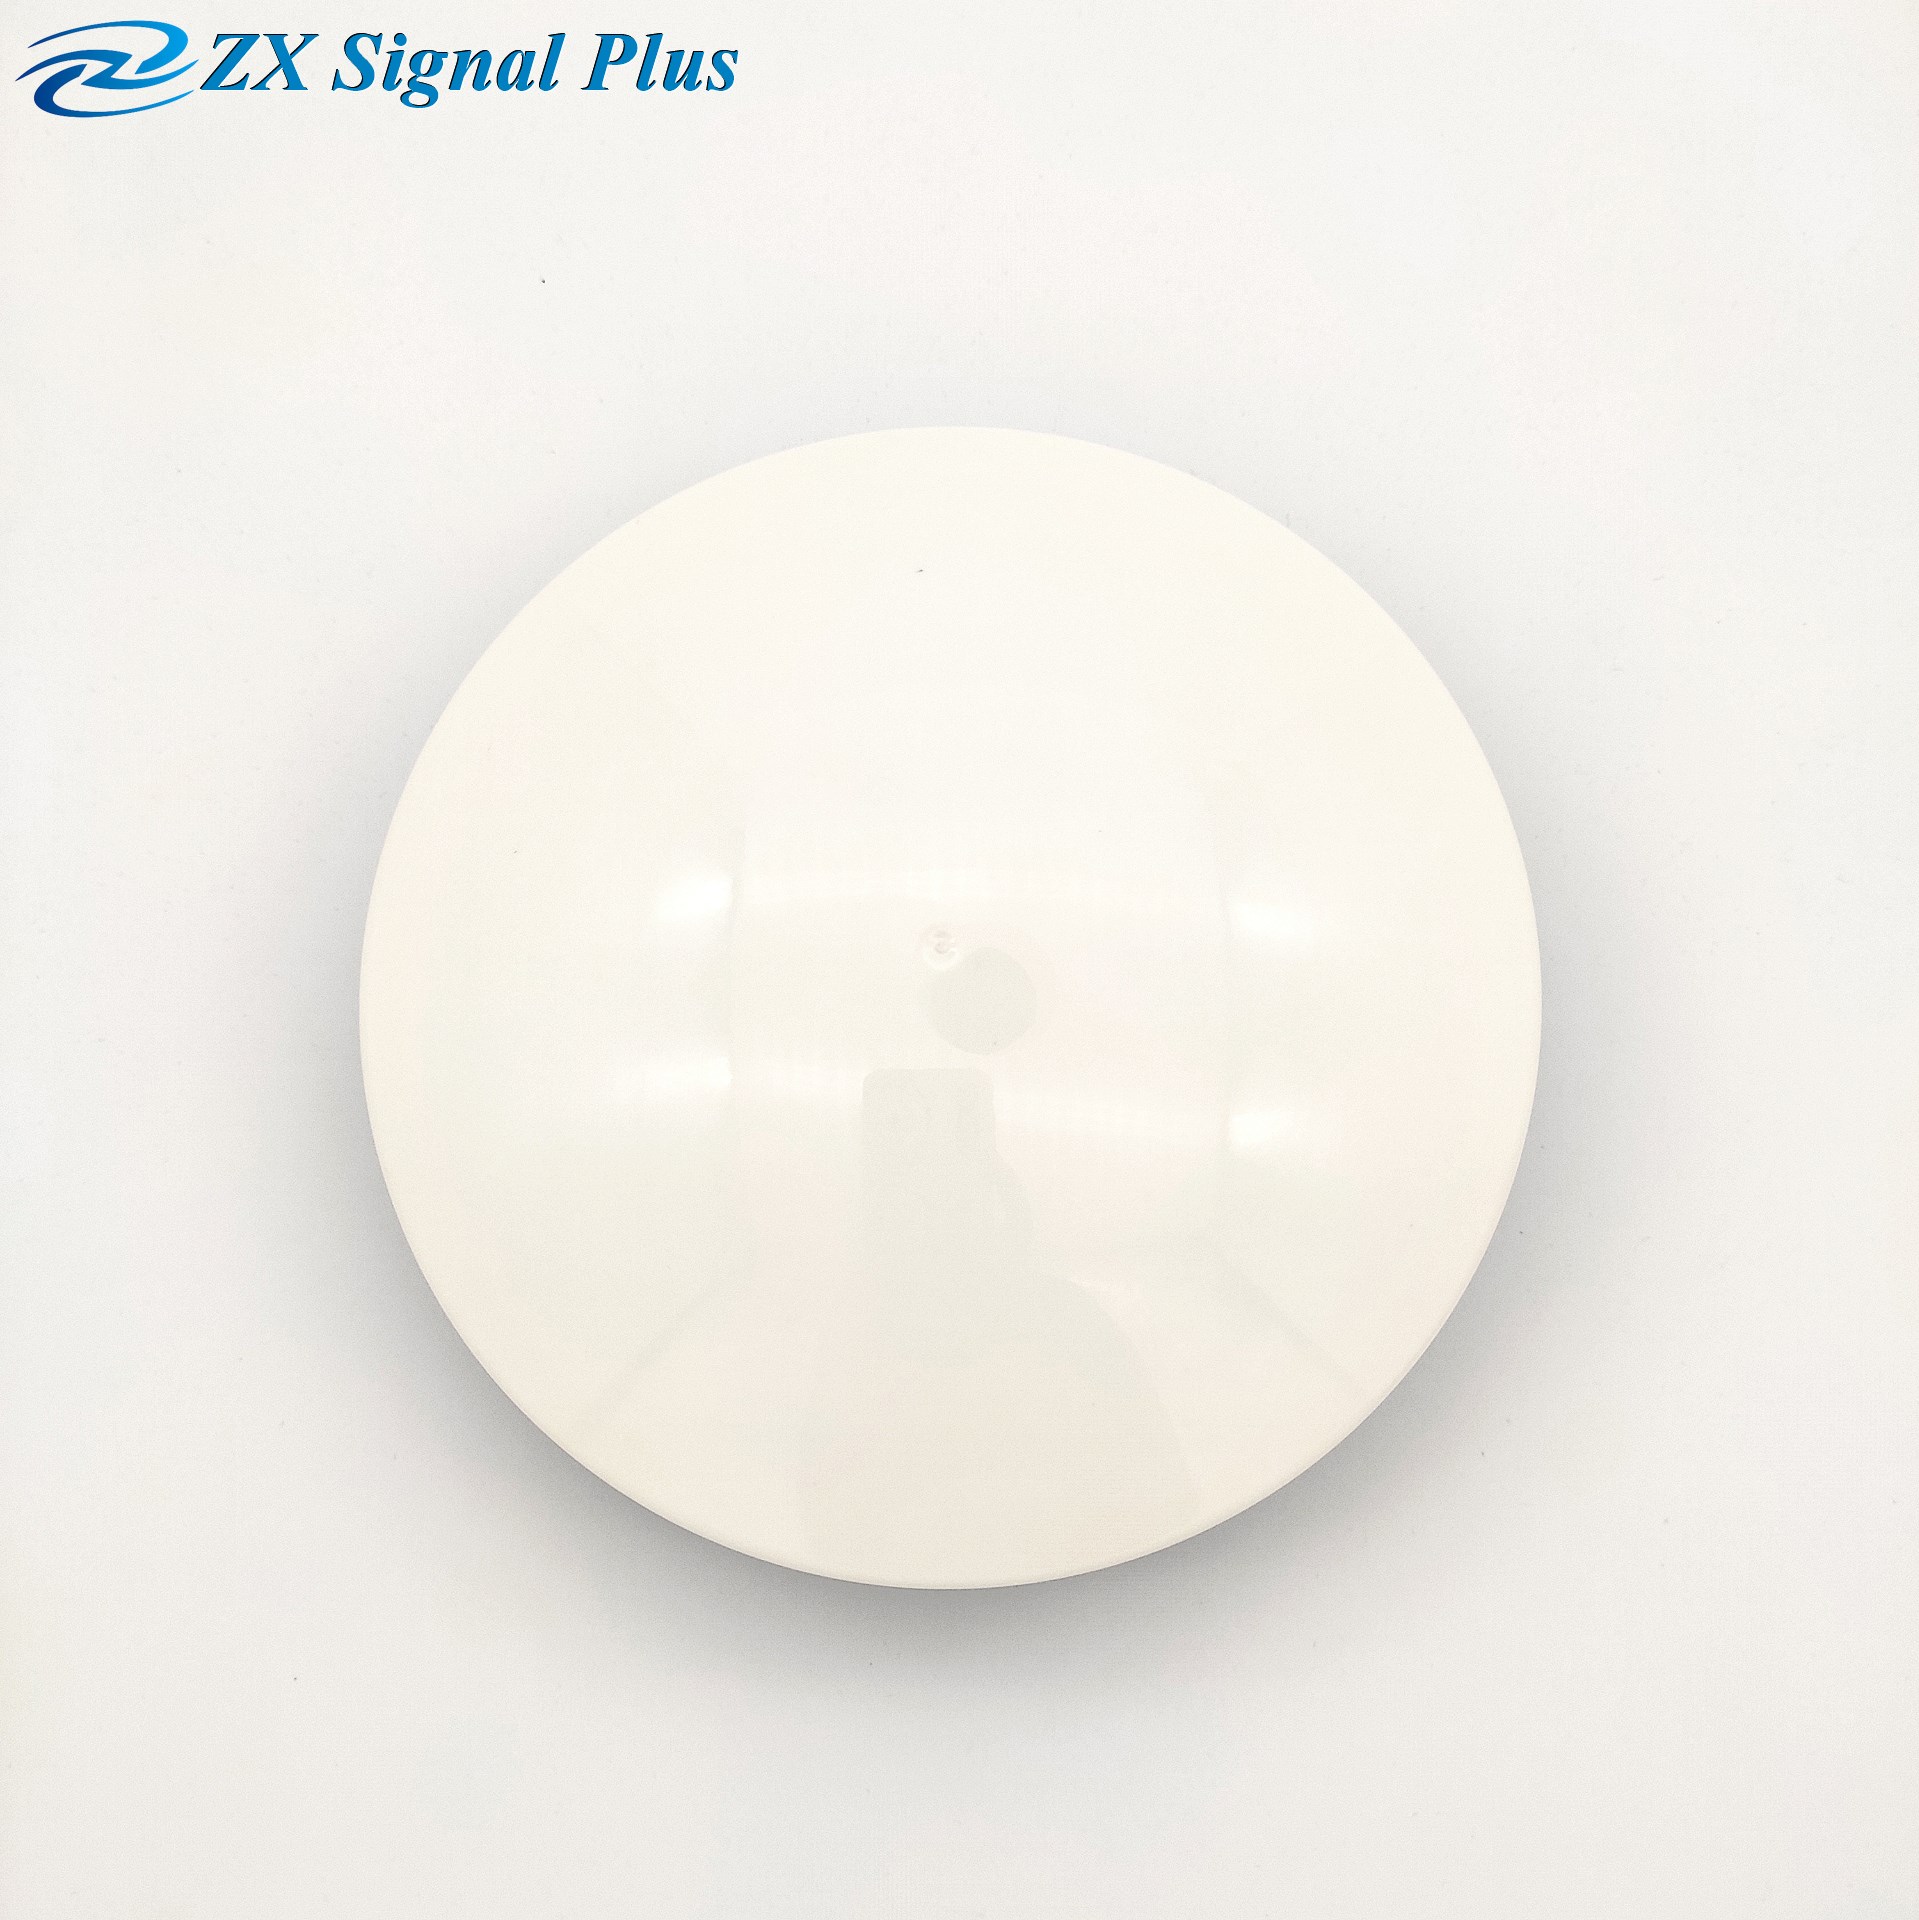 rugged gps antenna Manufacturer, rugged gps antenna For Sale 